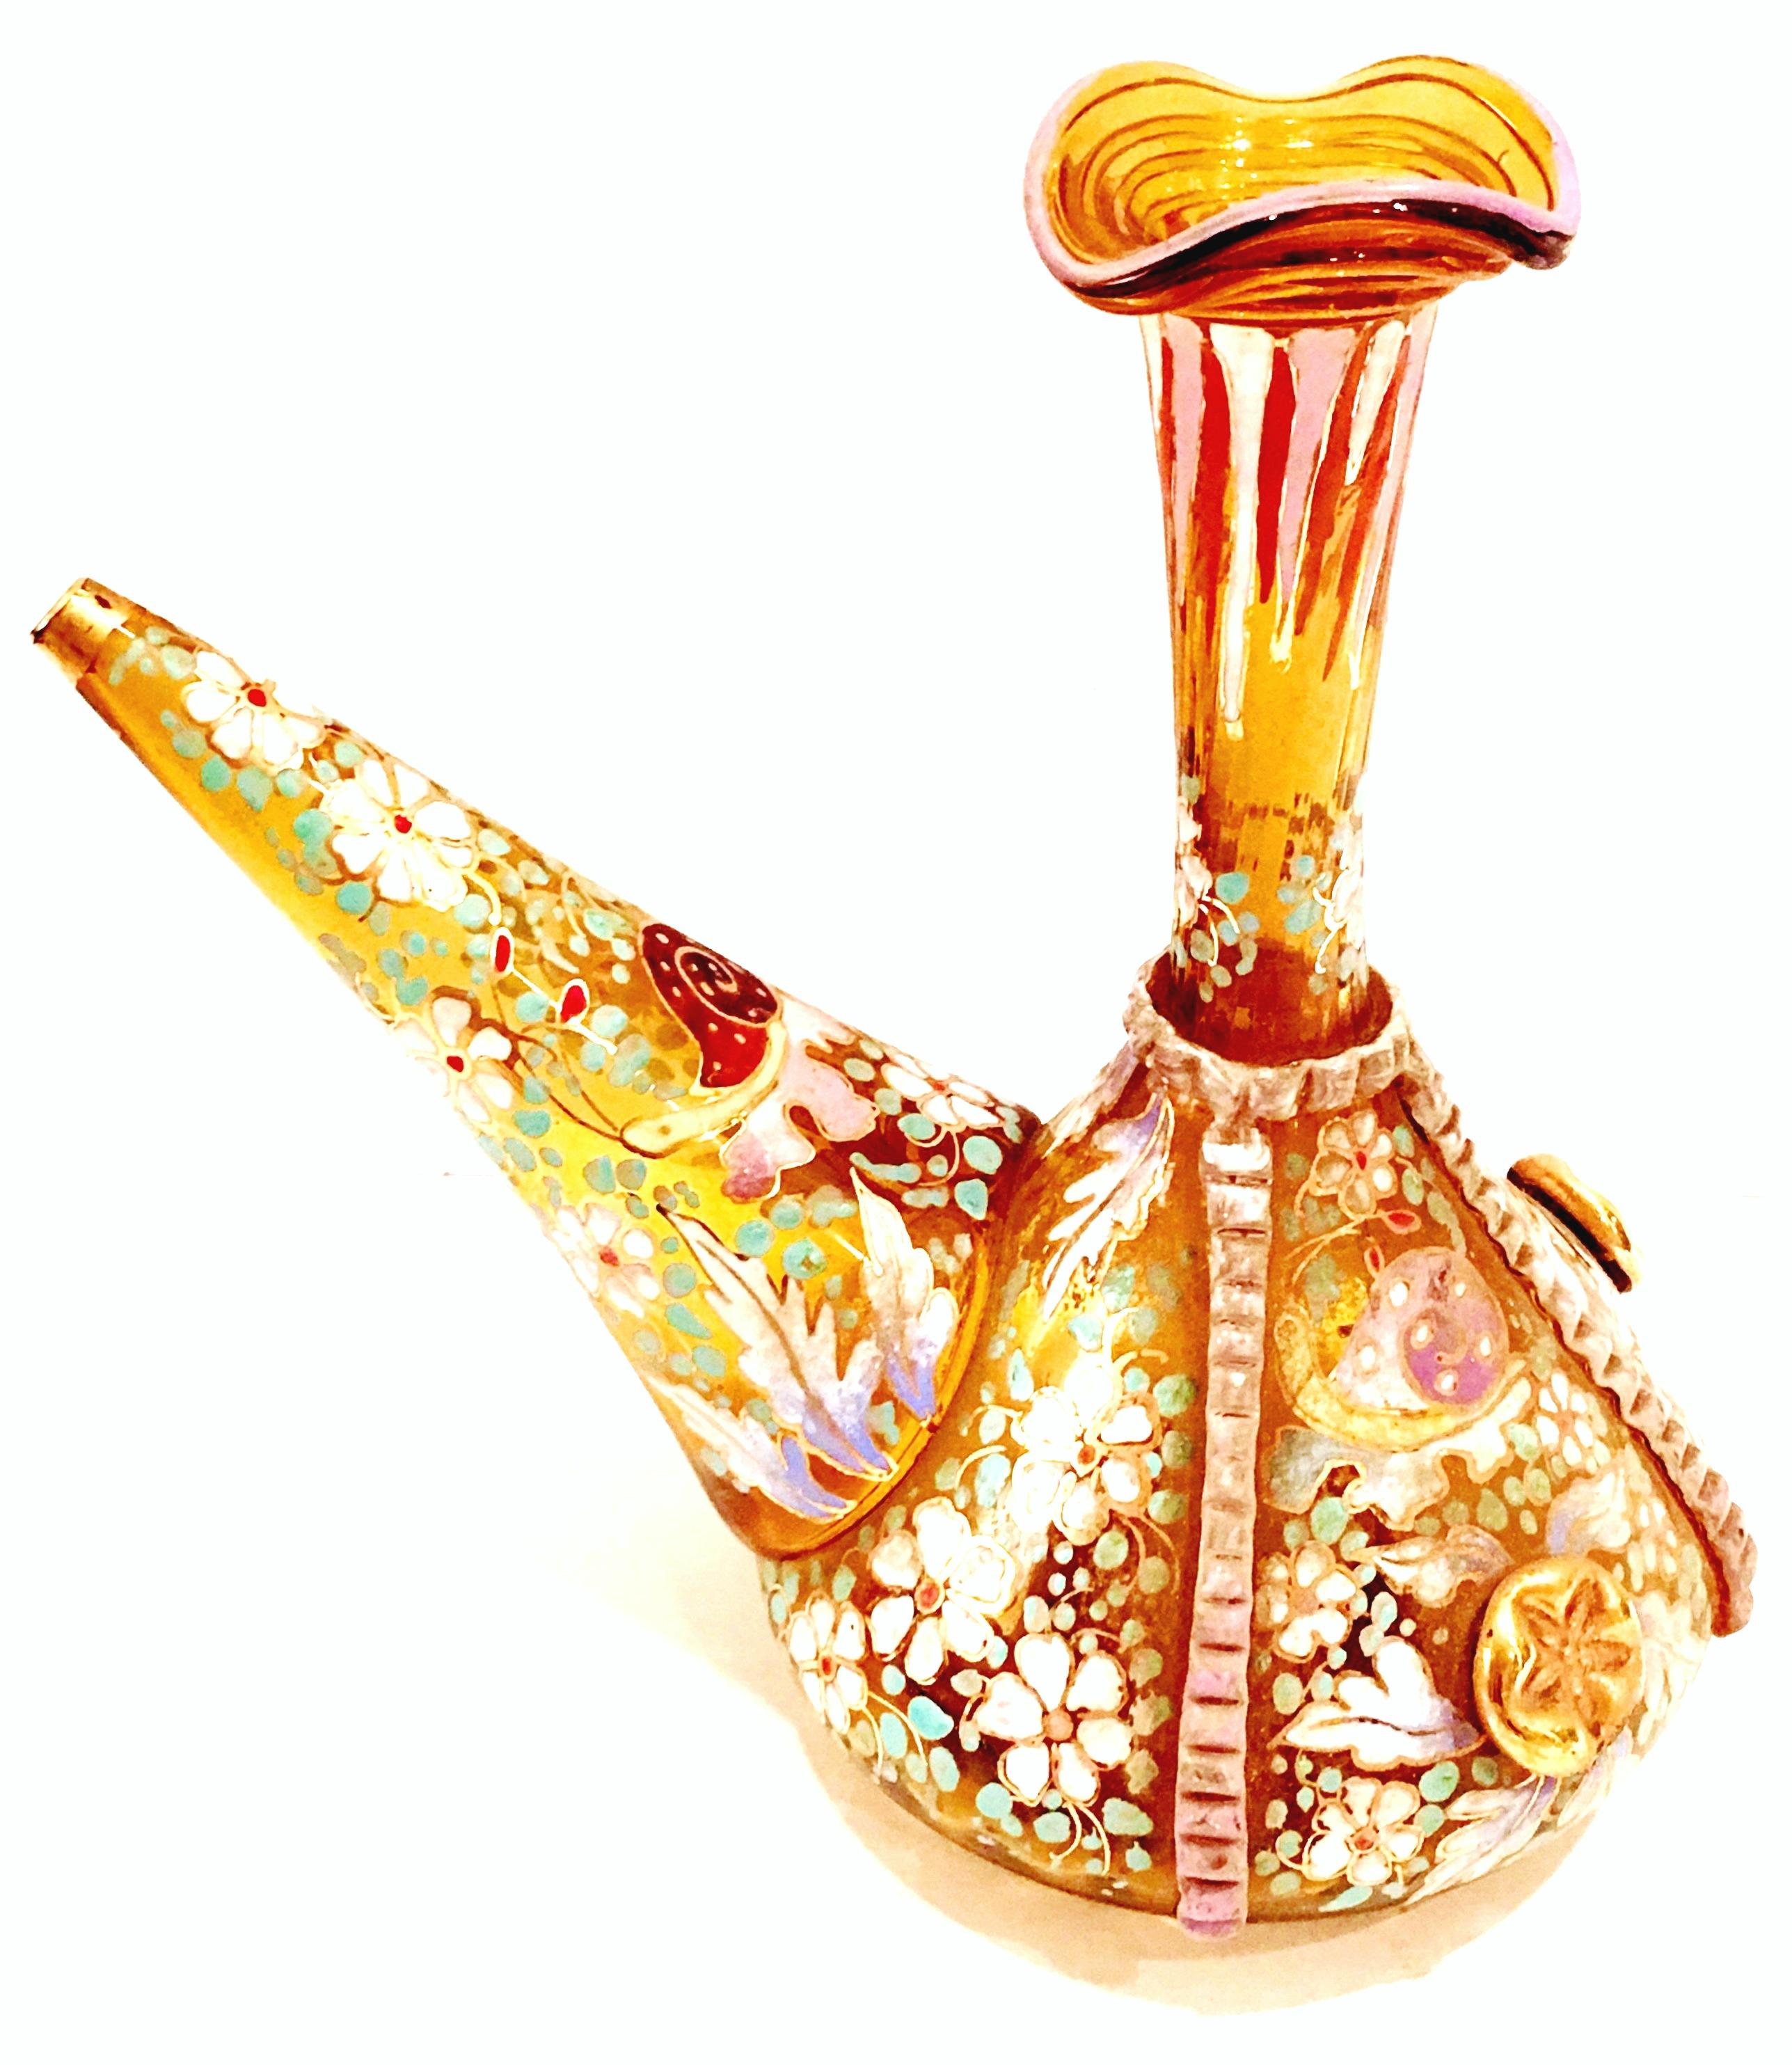 Hand-Crafted 20th Century Spanish Blown Glass Hand Painted Vino Bottle